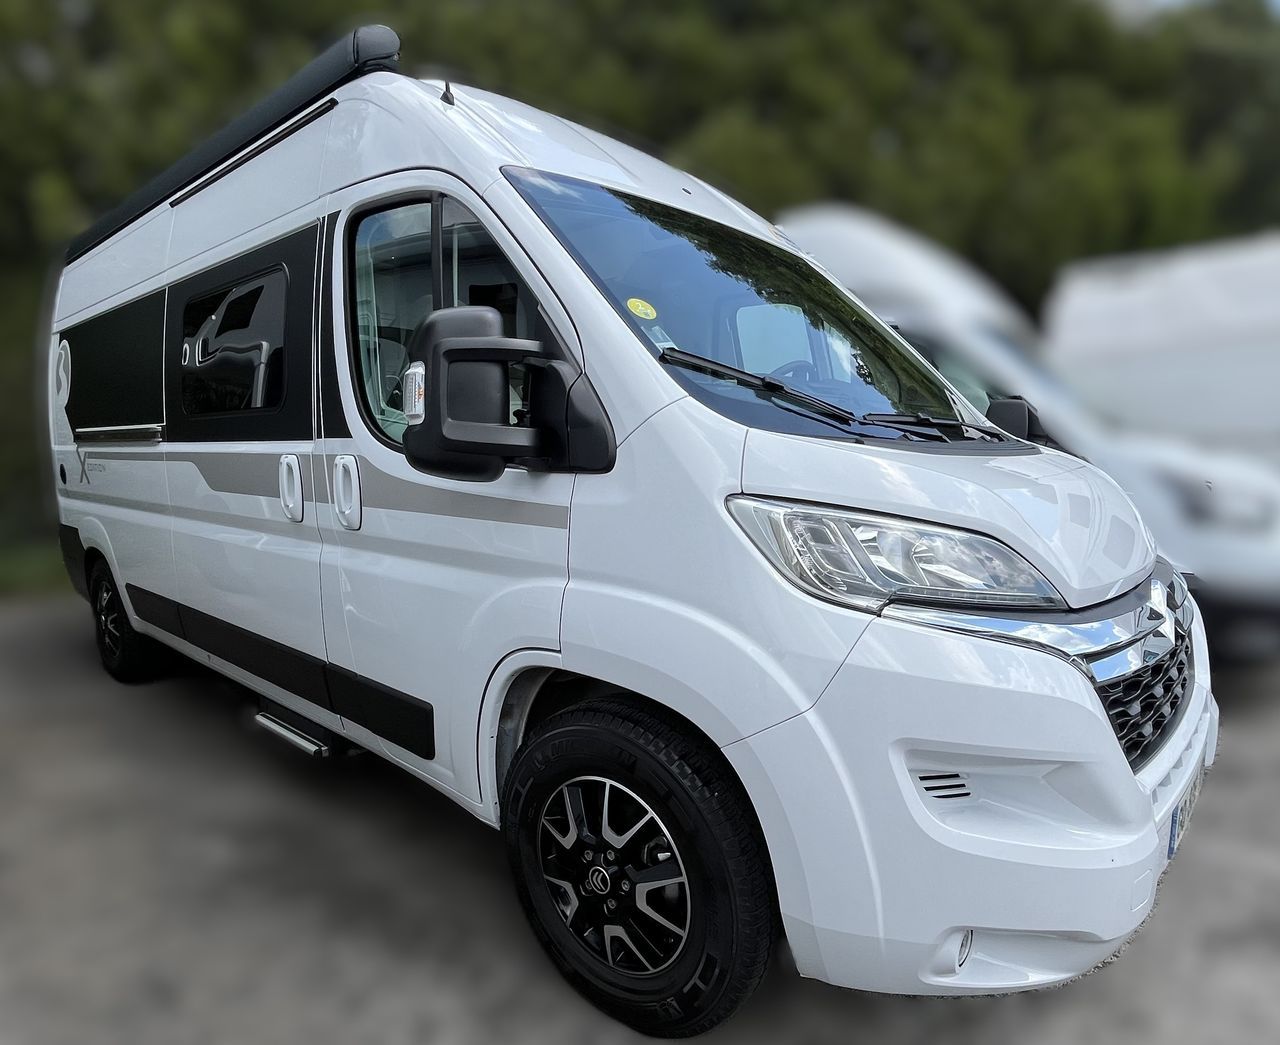 Camping-car BAVARIA K600G EDITION SPECIALE